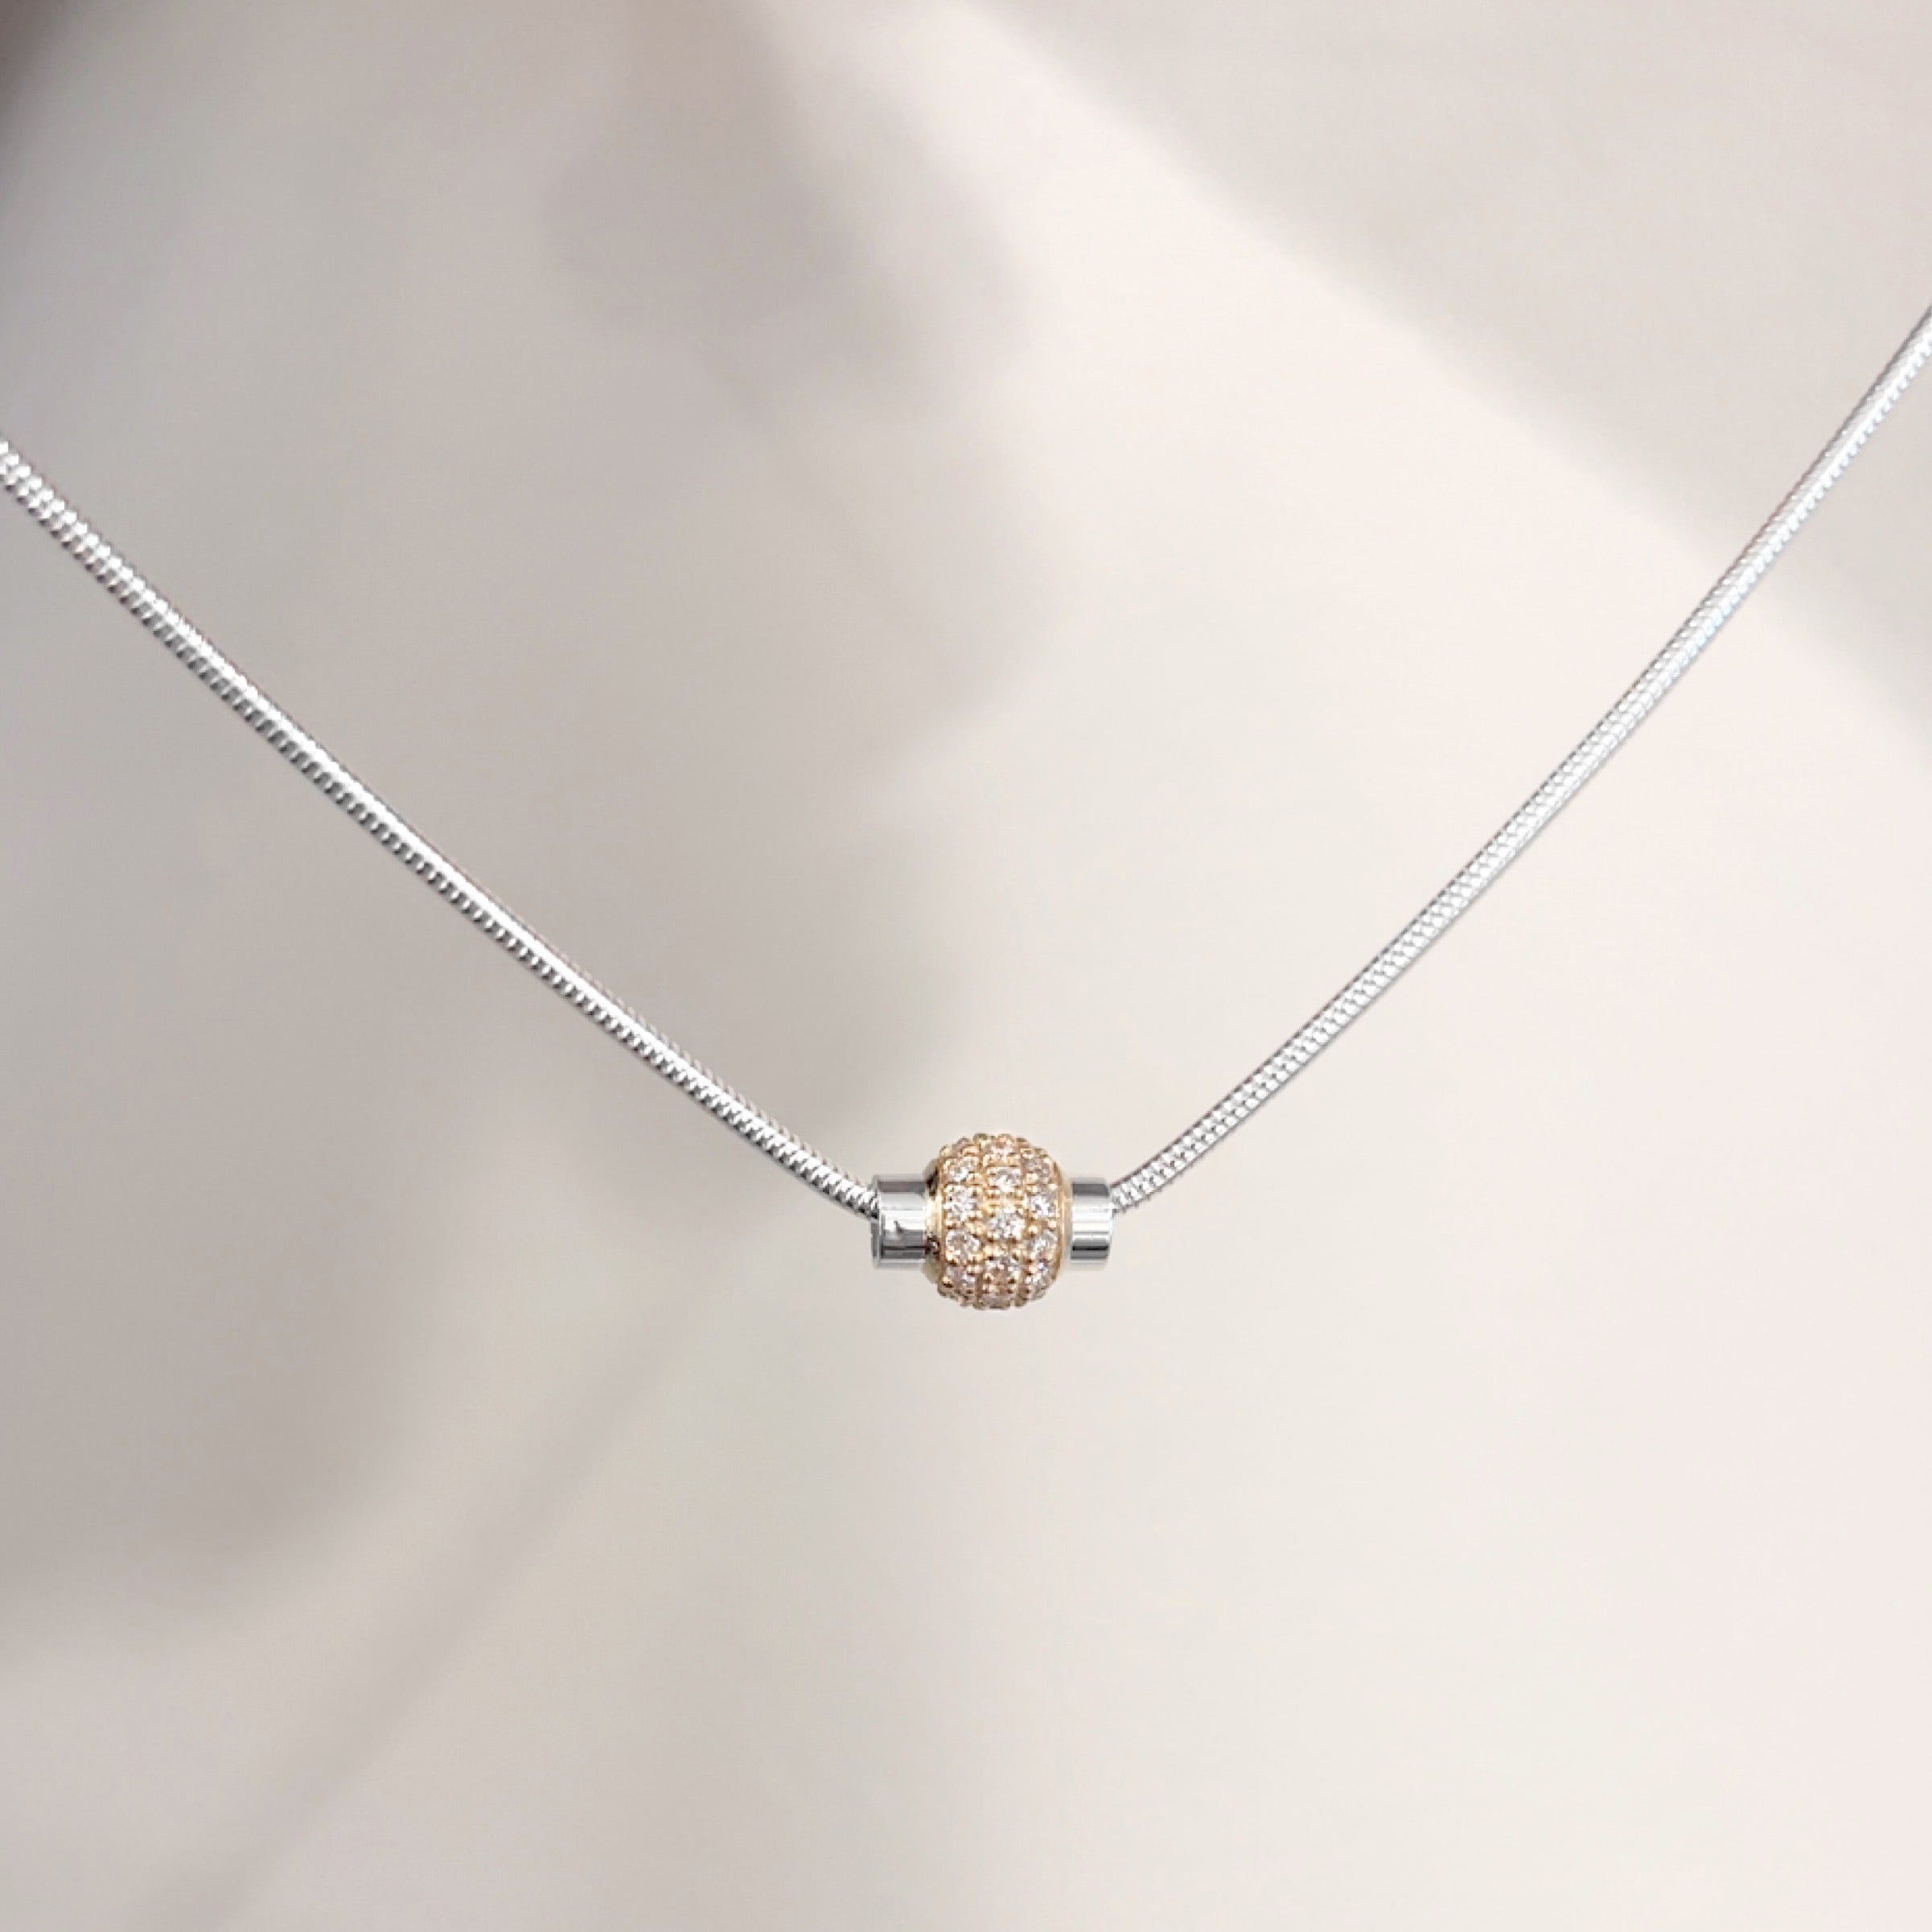 Solitaire Diamond Ball Necklace in 14K Gold - Michelle Chang